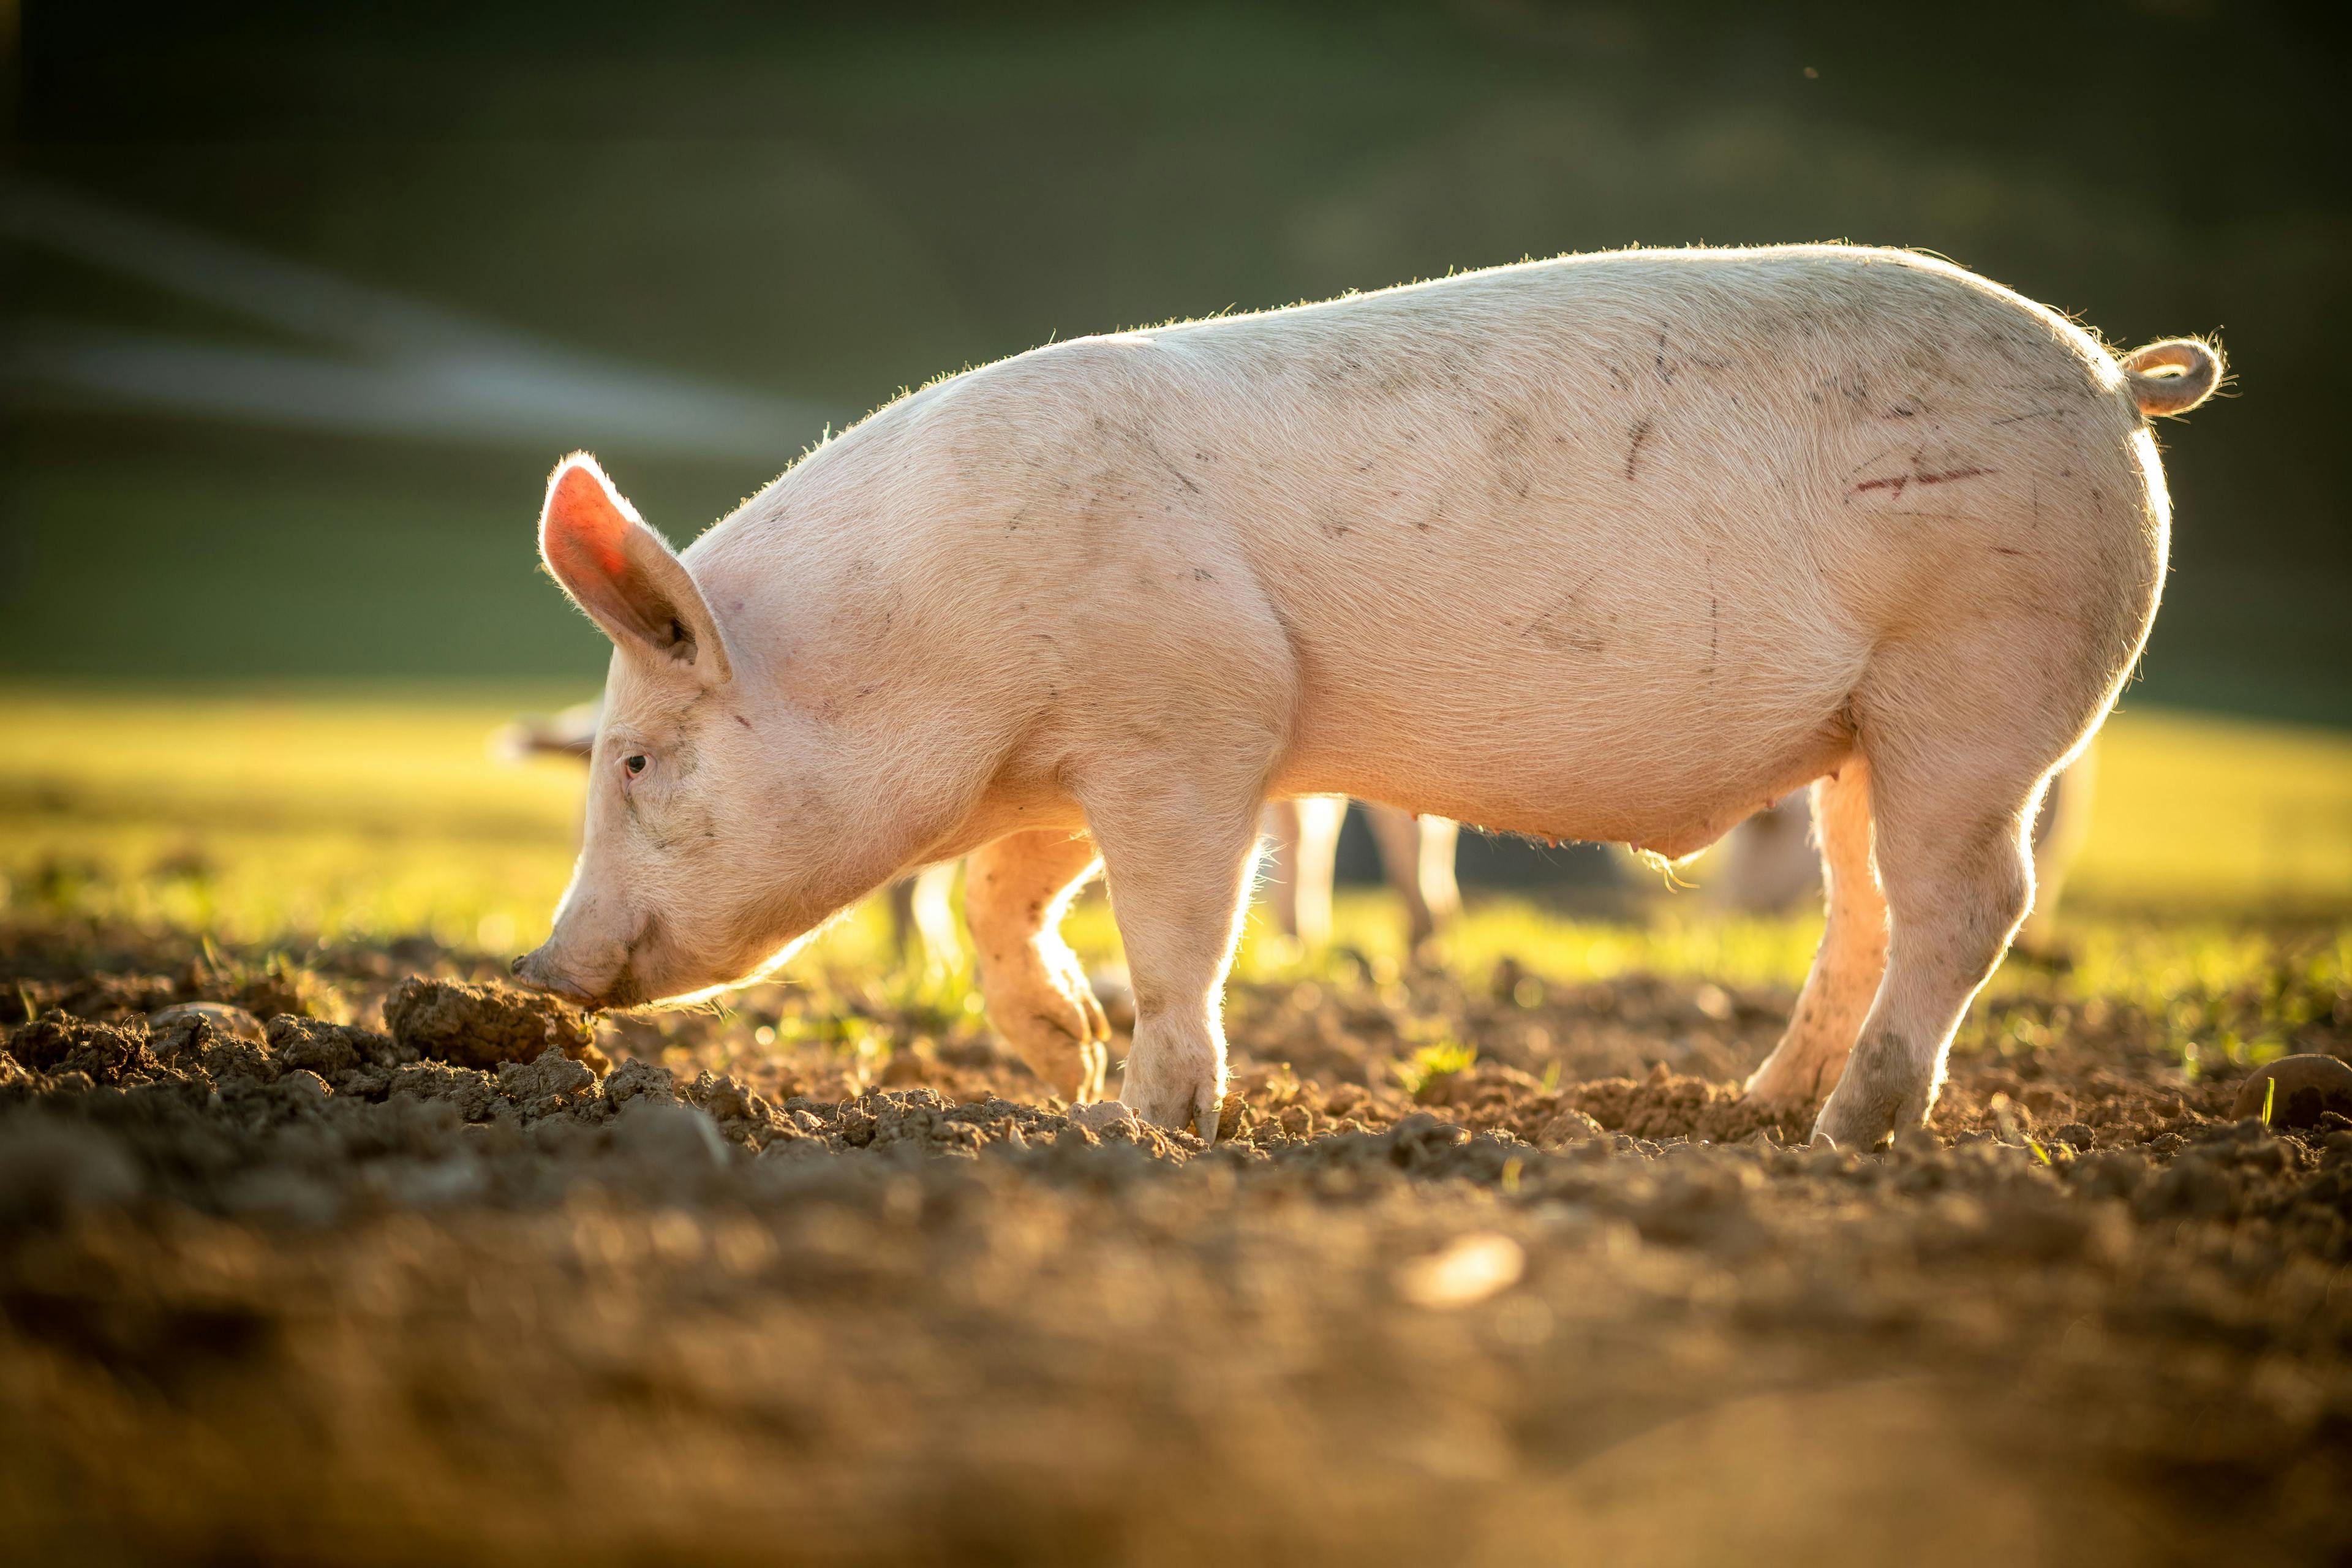 A swine standing on soil at a farm.